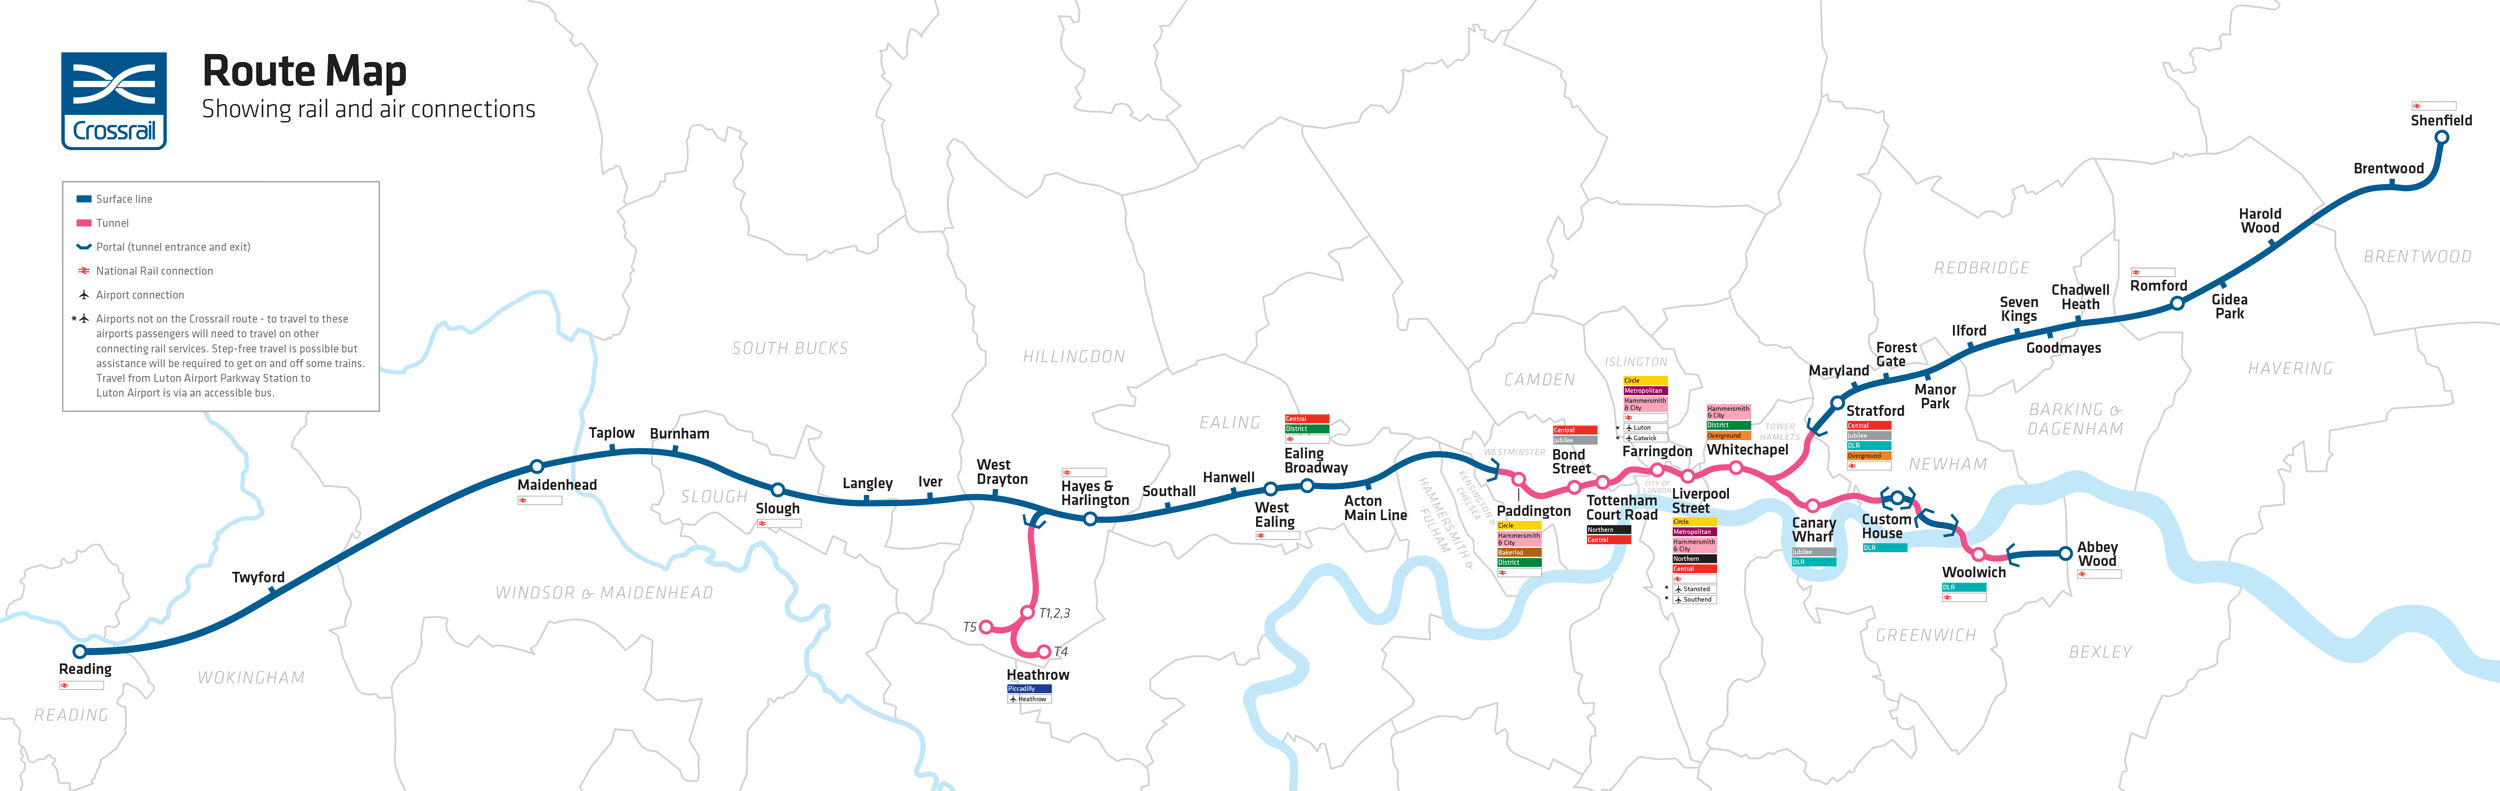 crossrail regional route map 2017 connections and boroughs eng - Crossrail&#039;s &#039;eading west!